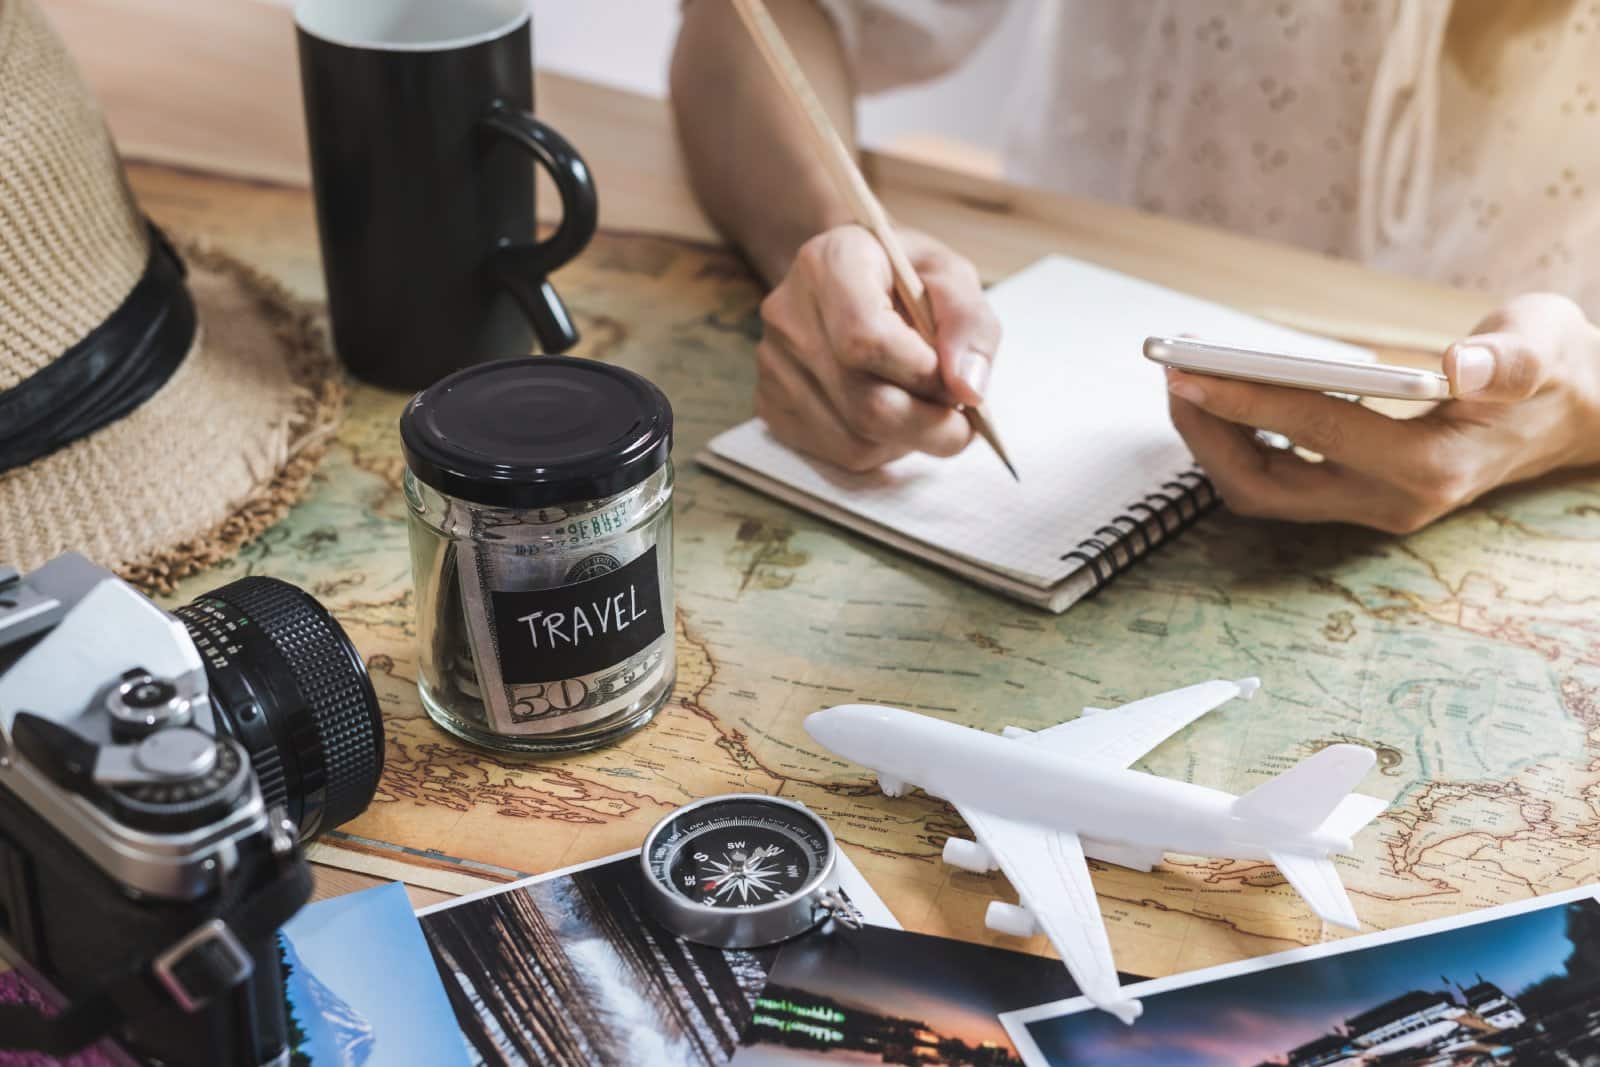 <p>Summer Score! Armed with these hacks, you’re all set to book your dream holiday without breaking the bank. Get ready to make memories (and savings) that’ll last a lifetime. Here’s to a summer of smart travel and even smarter savings. Bon voyage!</p>